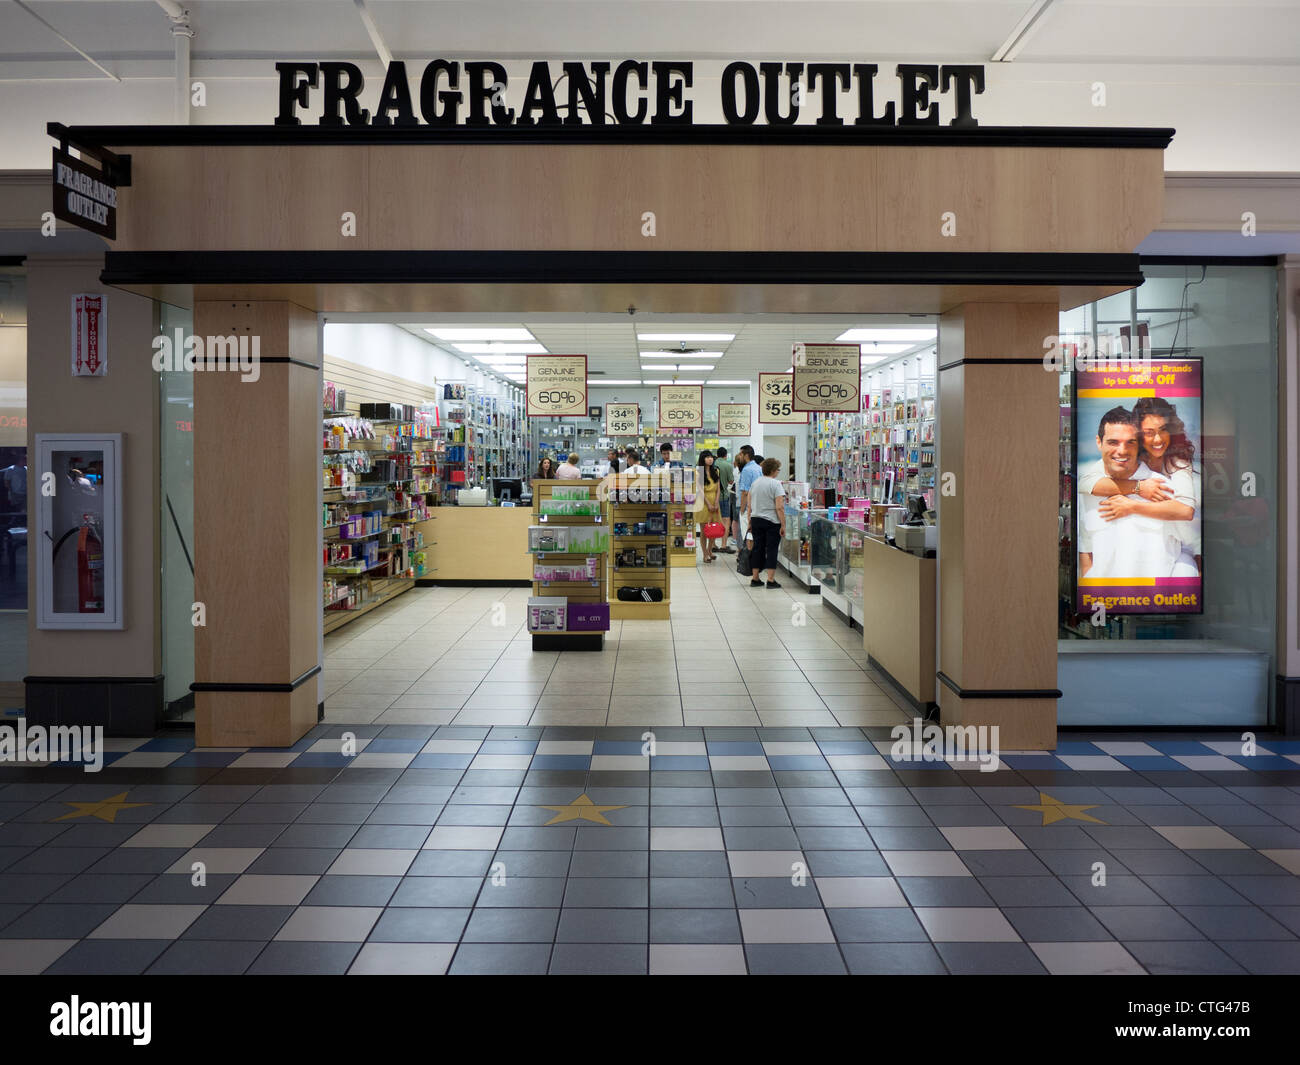 fragrance outlet store entrance retail shopping mall Stock Photo, Royalty Free Image: 49527055 ...